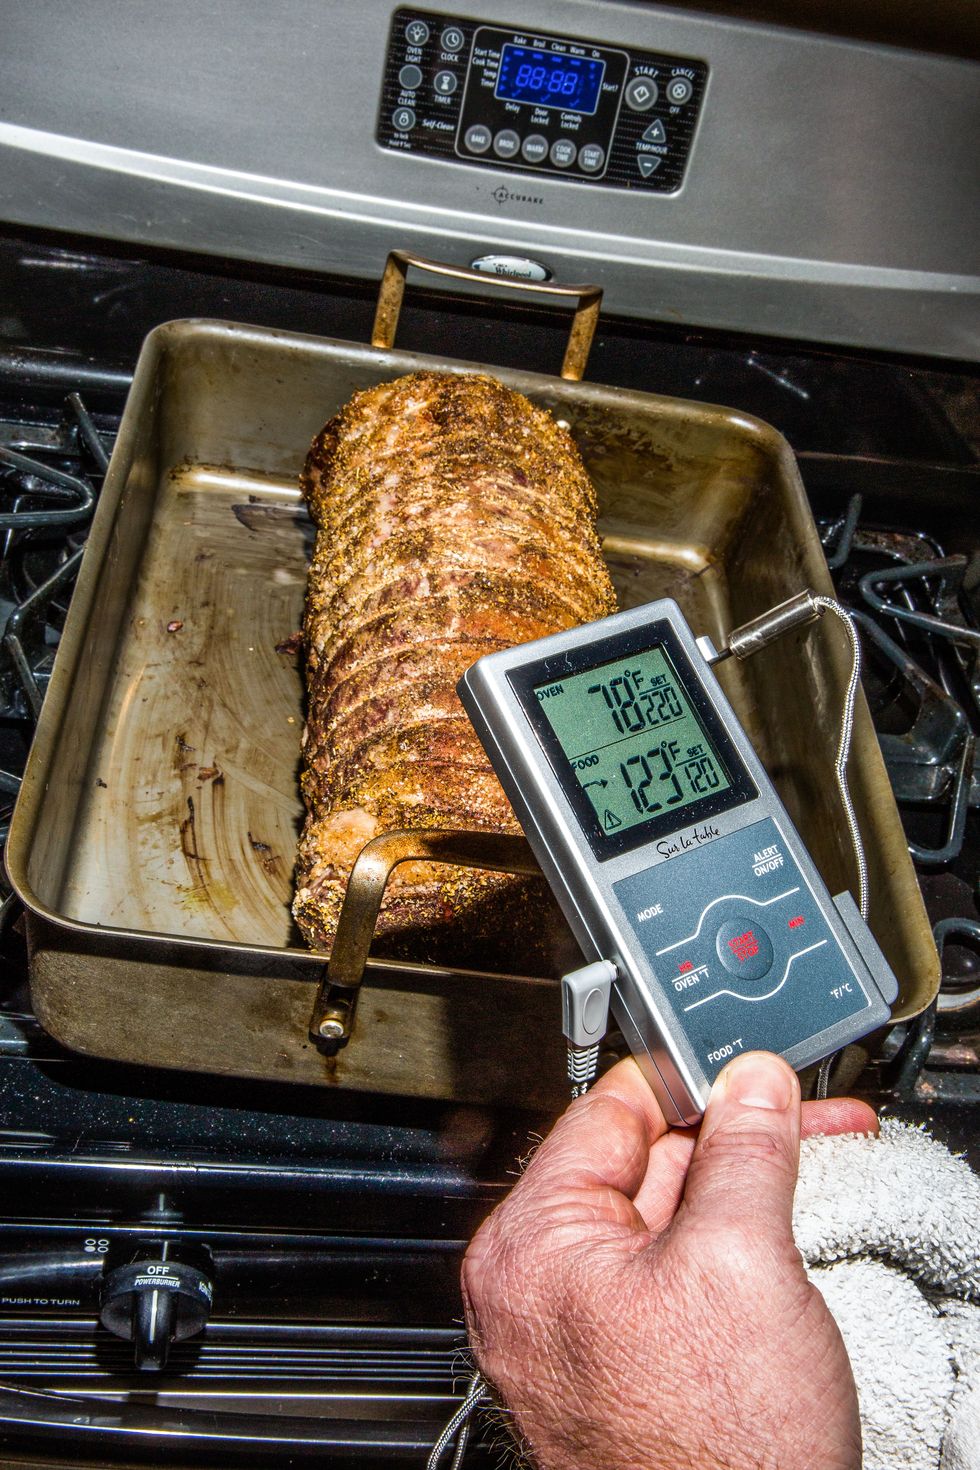 Cooking & Kitchen Tips : How to Insert a Meat Thermometer in a